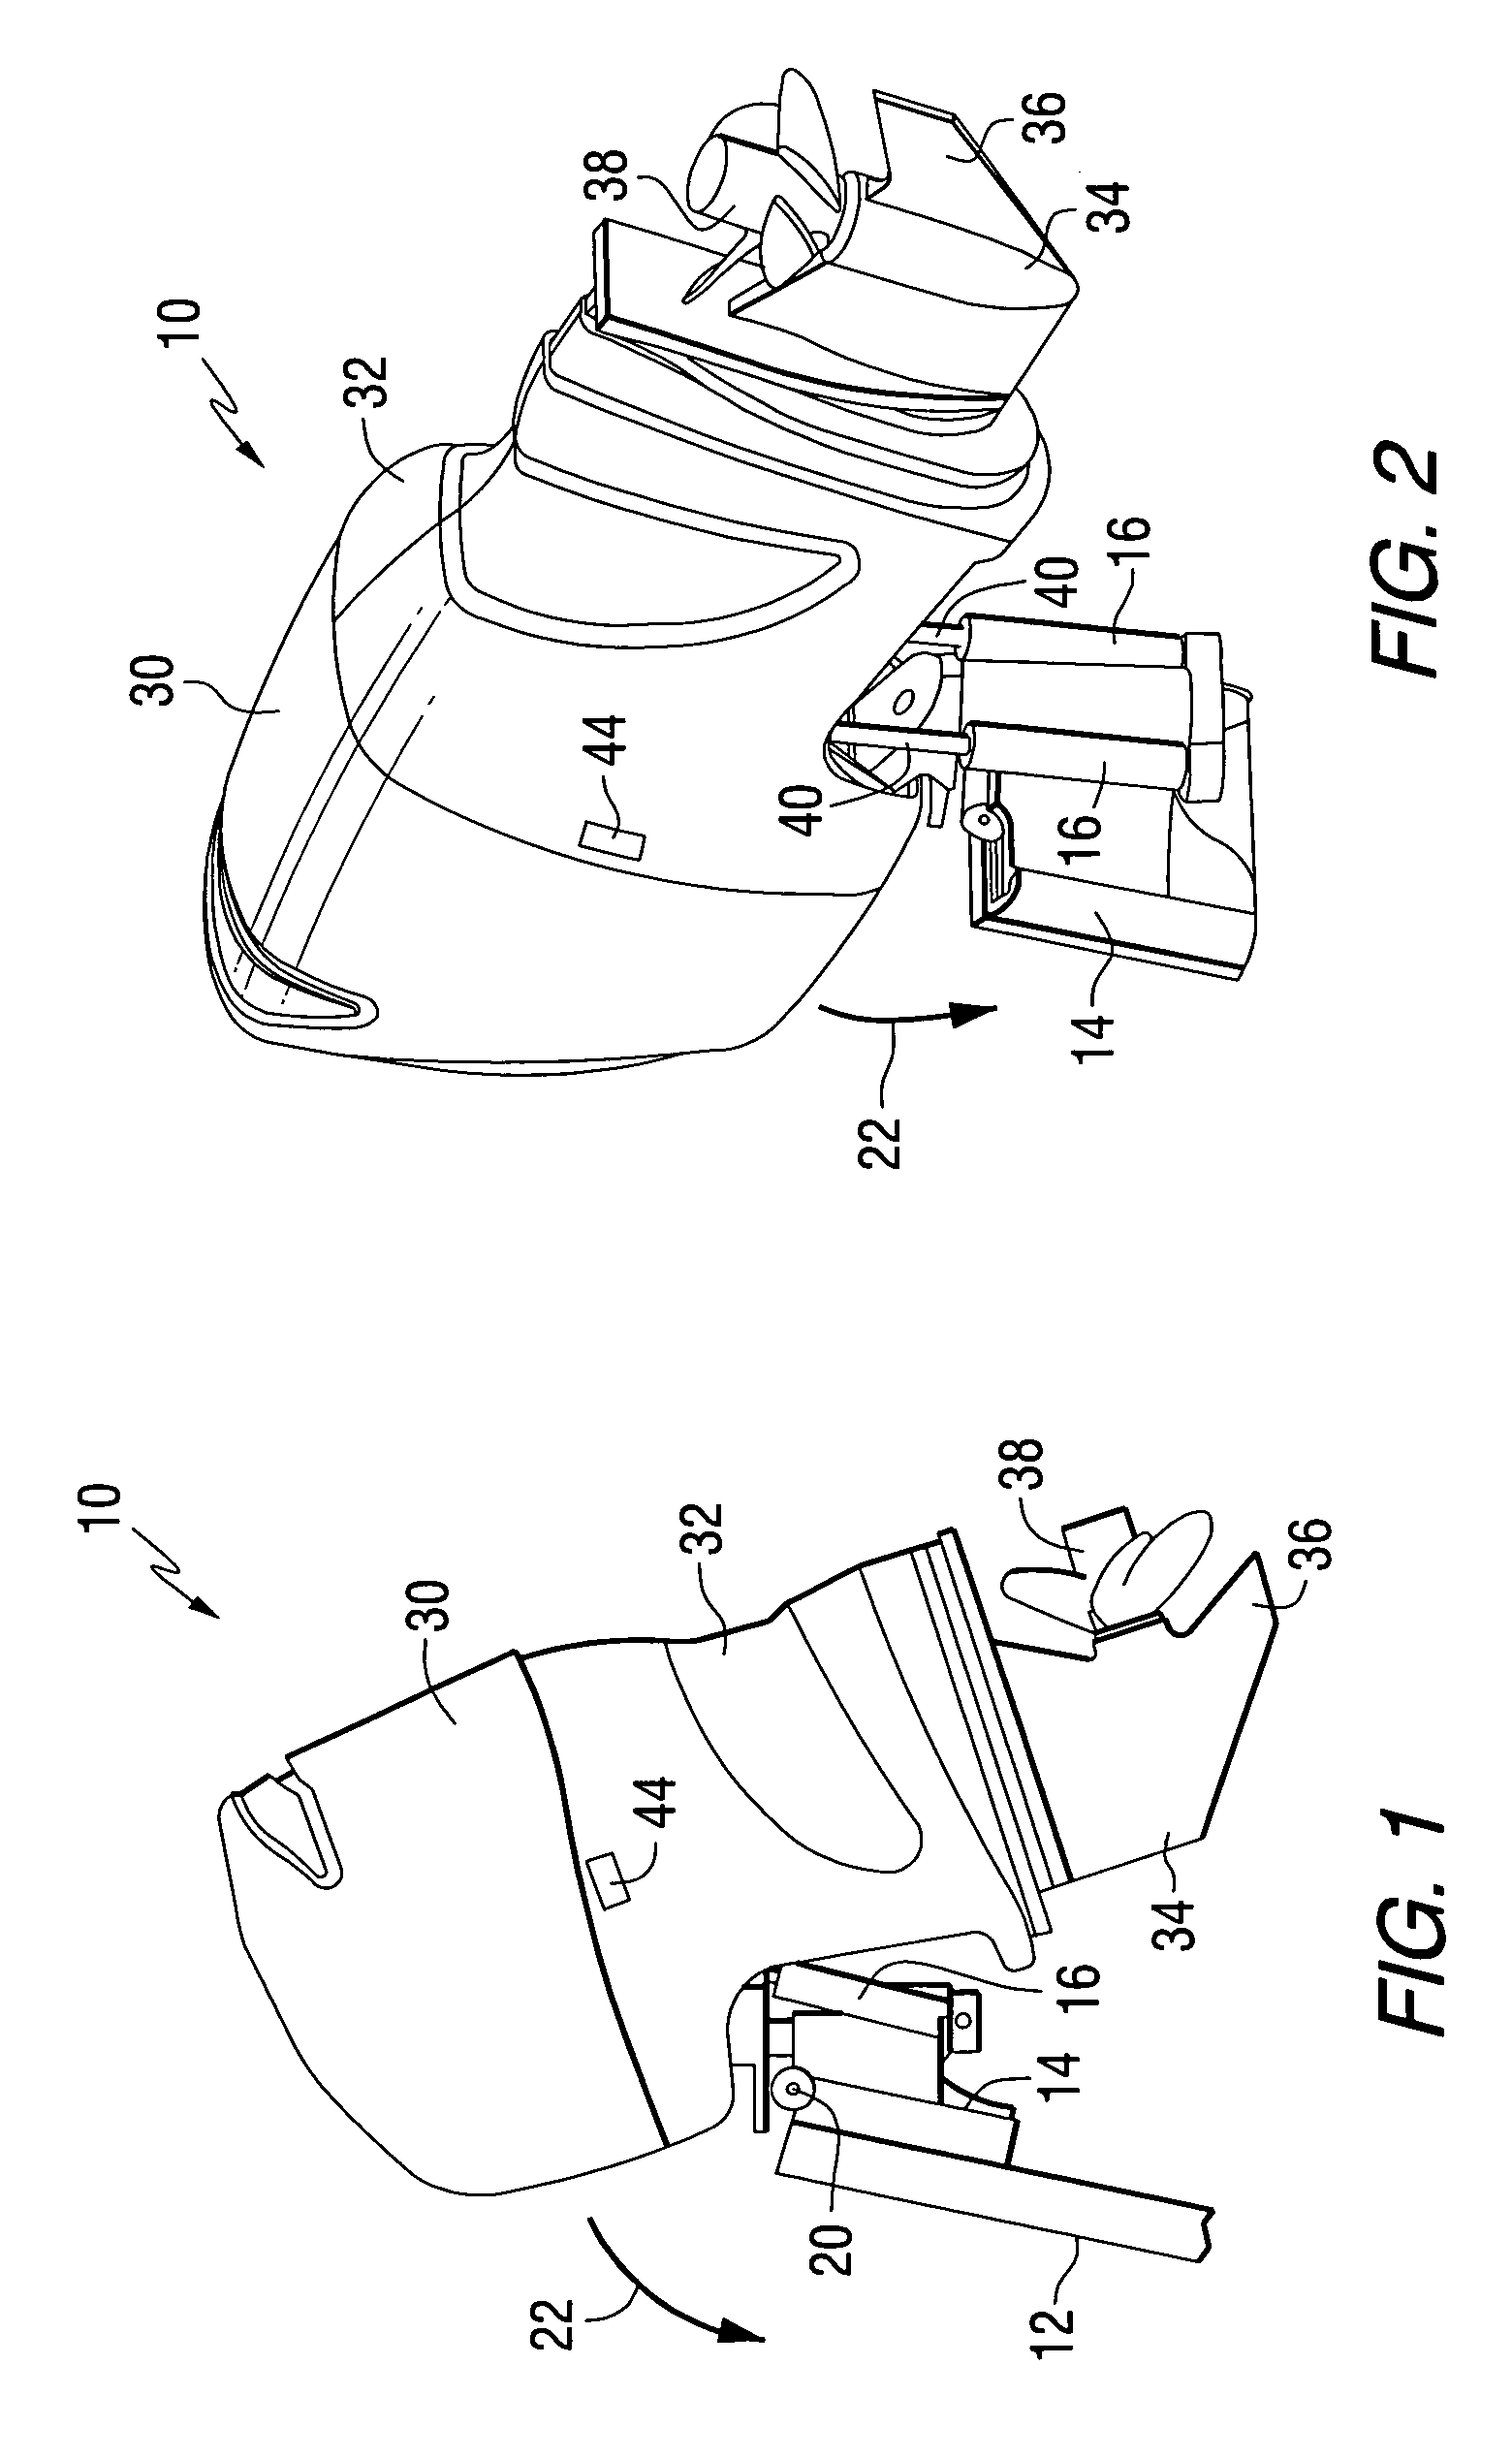 Method for controlling the tilt position of a marine propulsion device